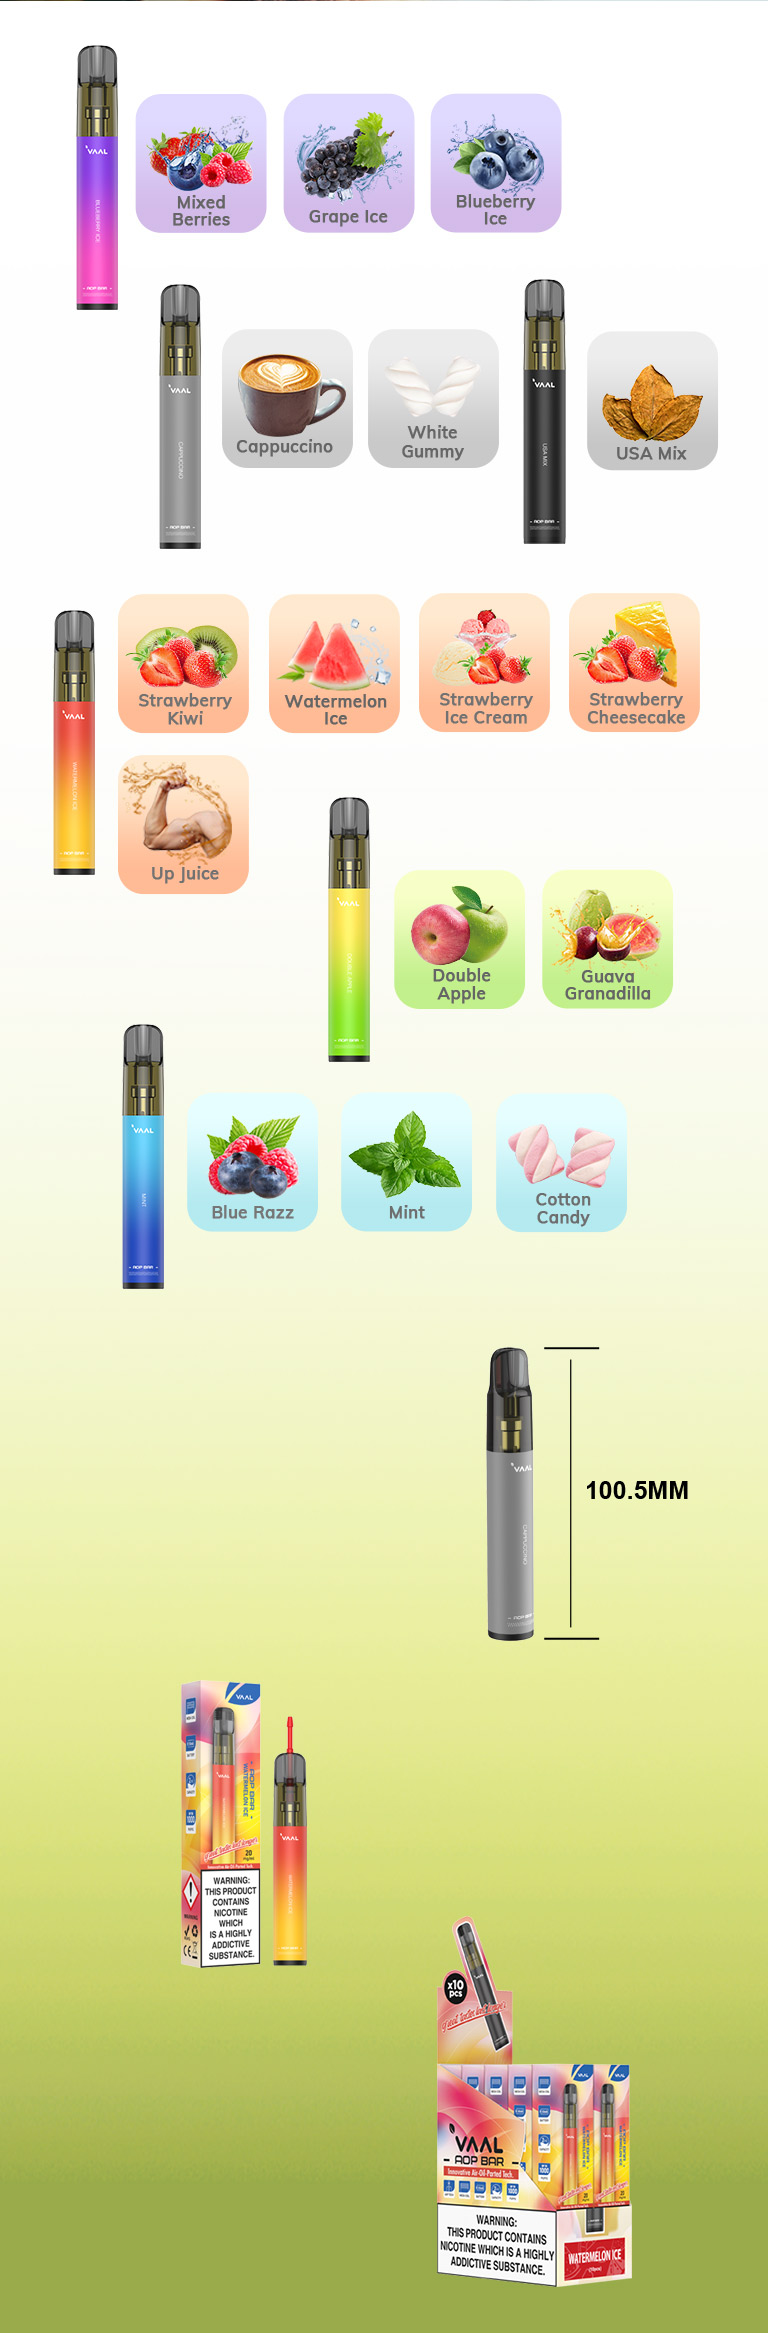 Specification of VAAL AOP BAR disposable vape kit: Up to 1000 puffs, 550mAh battery, 2ml E-liquid Capacity, 1.4ohm mesh coil.